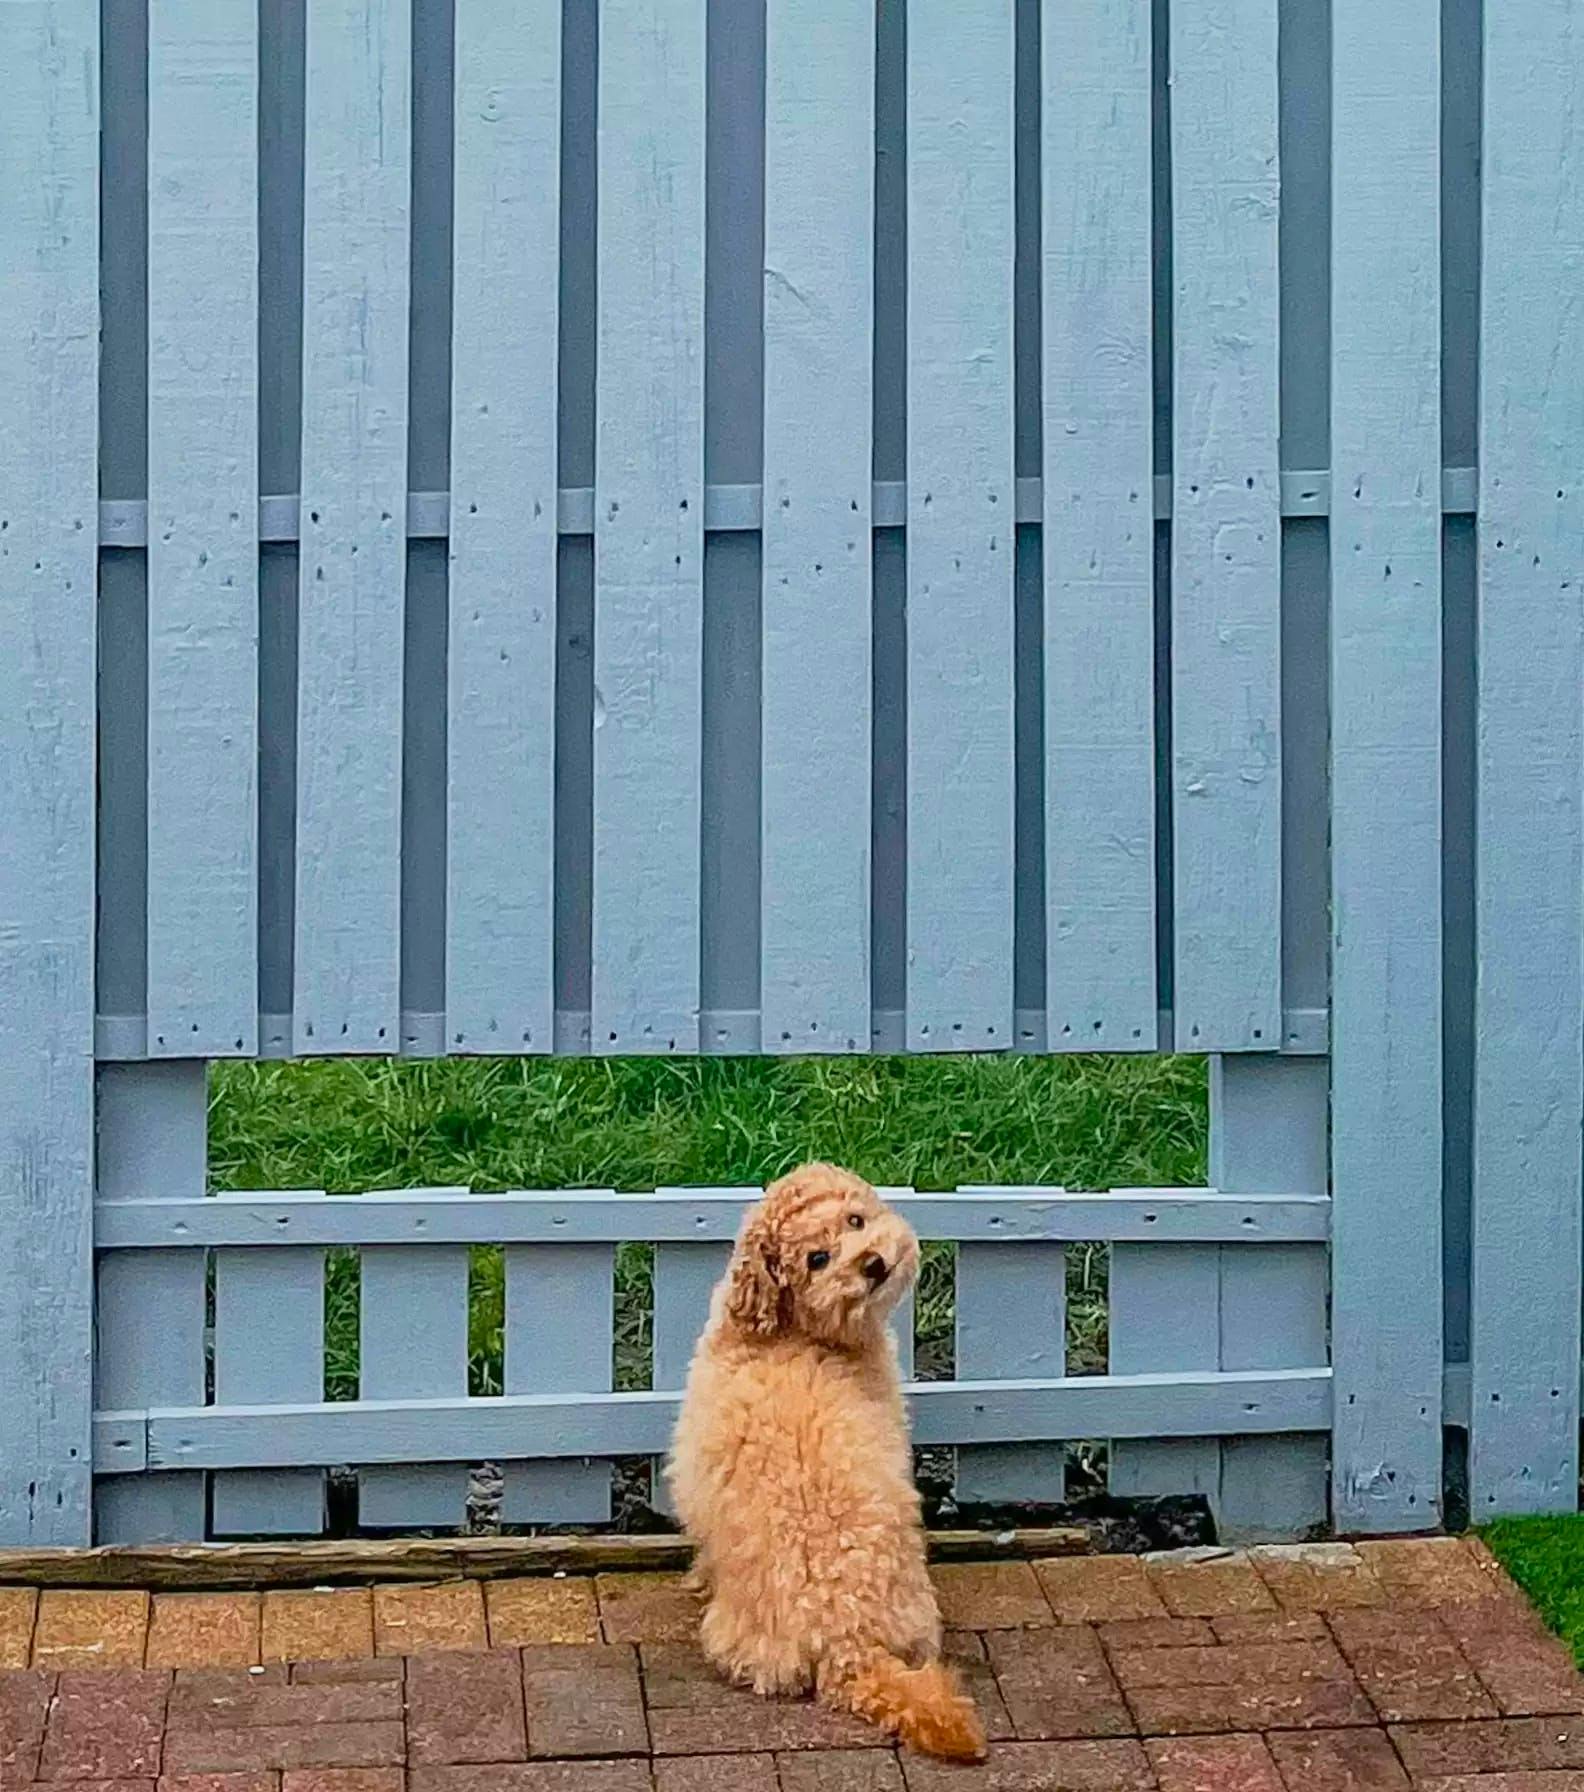 Harry the dog smiling next to his new fence window